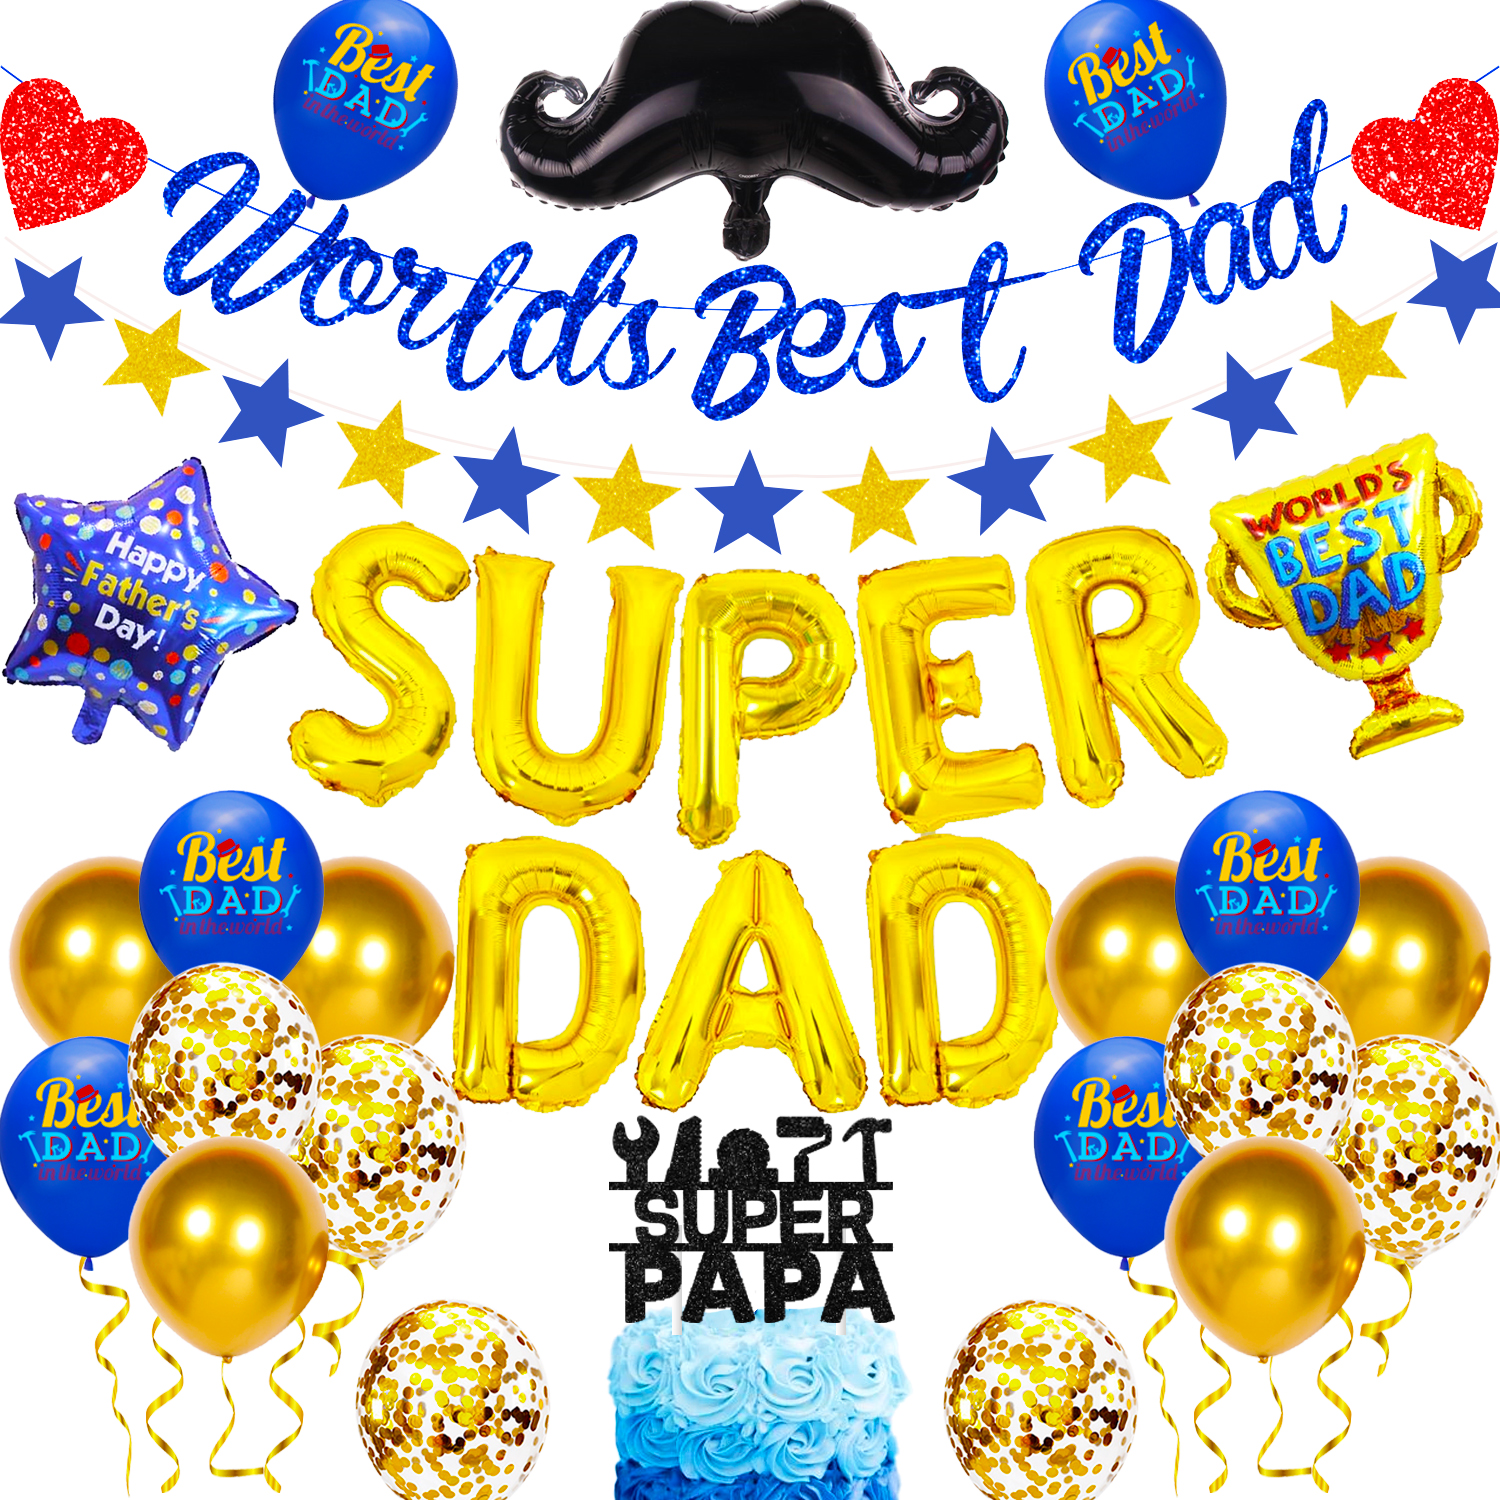 Happy Fathers Day Decorations - Super Dad Decorations for Father Birthday Party - World's Best Dad Banner and Best Dad Balloon - Super Dad Party Supplies for Home - image 1 of 6